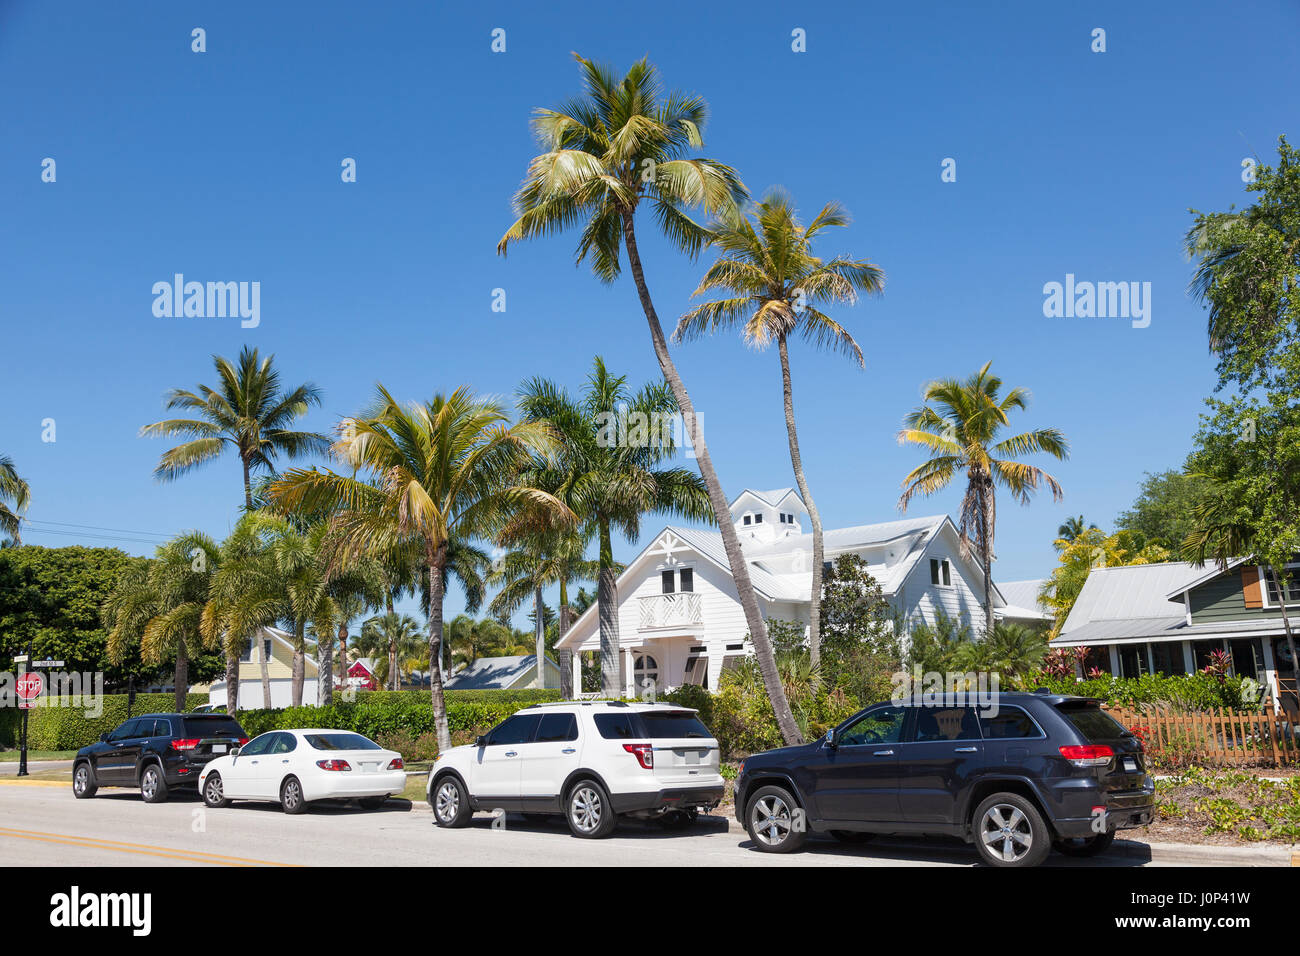 Cars parked on a street with palm trees in the city of Naples. Florida, United States Stock Photo